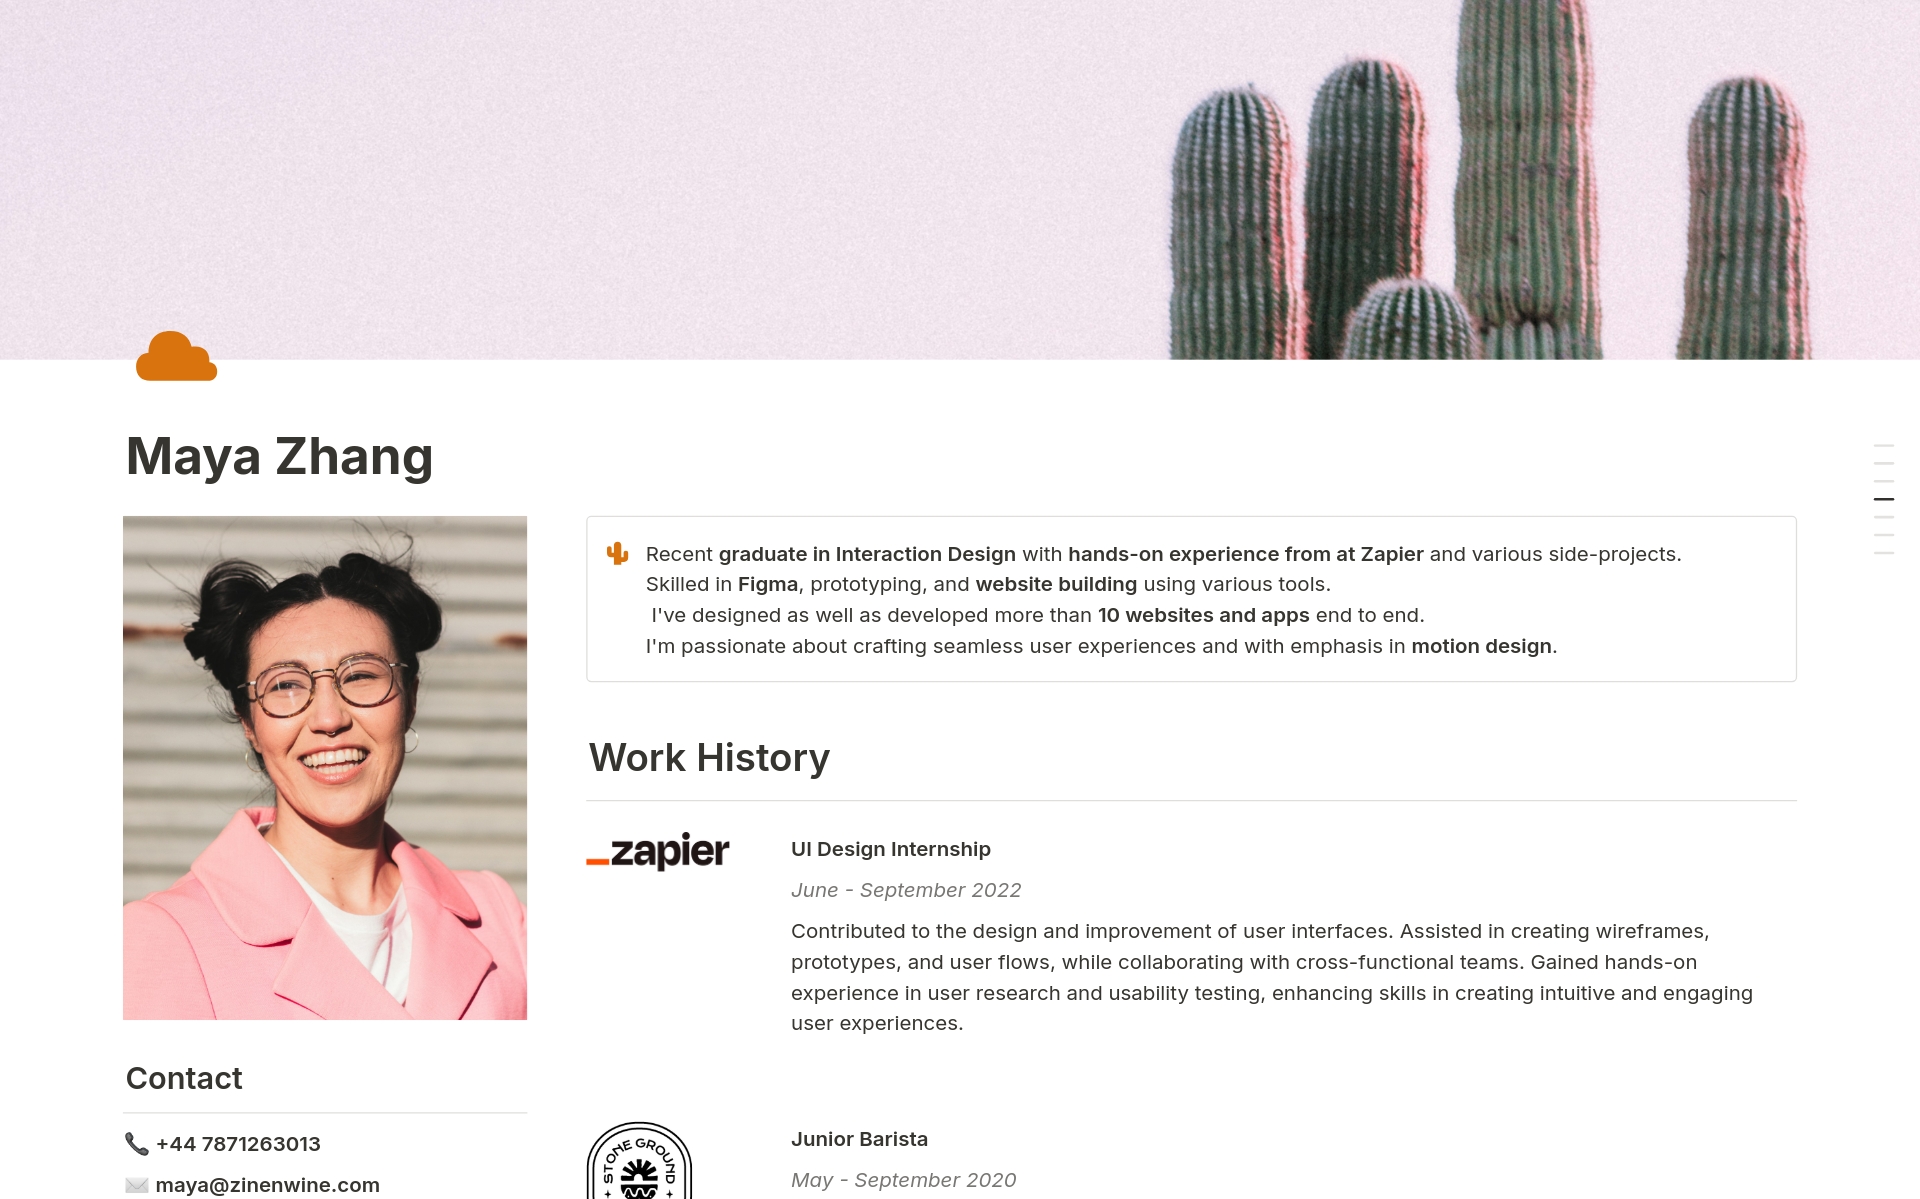 A well-designed online resume